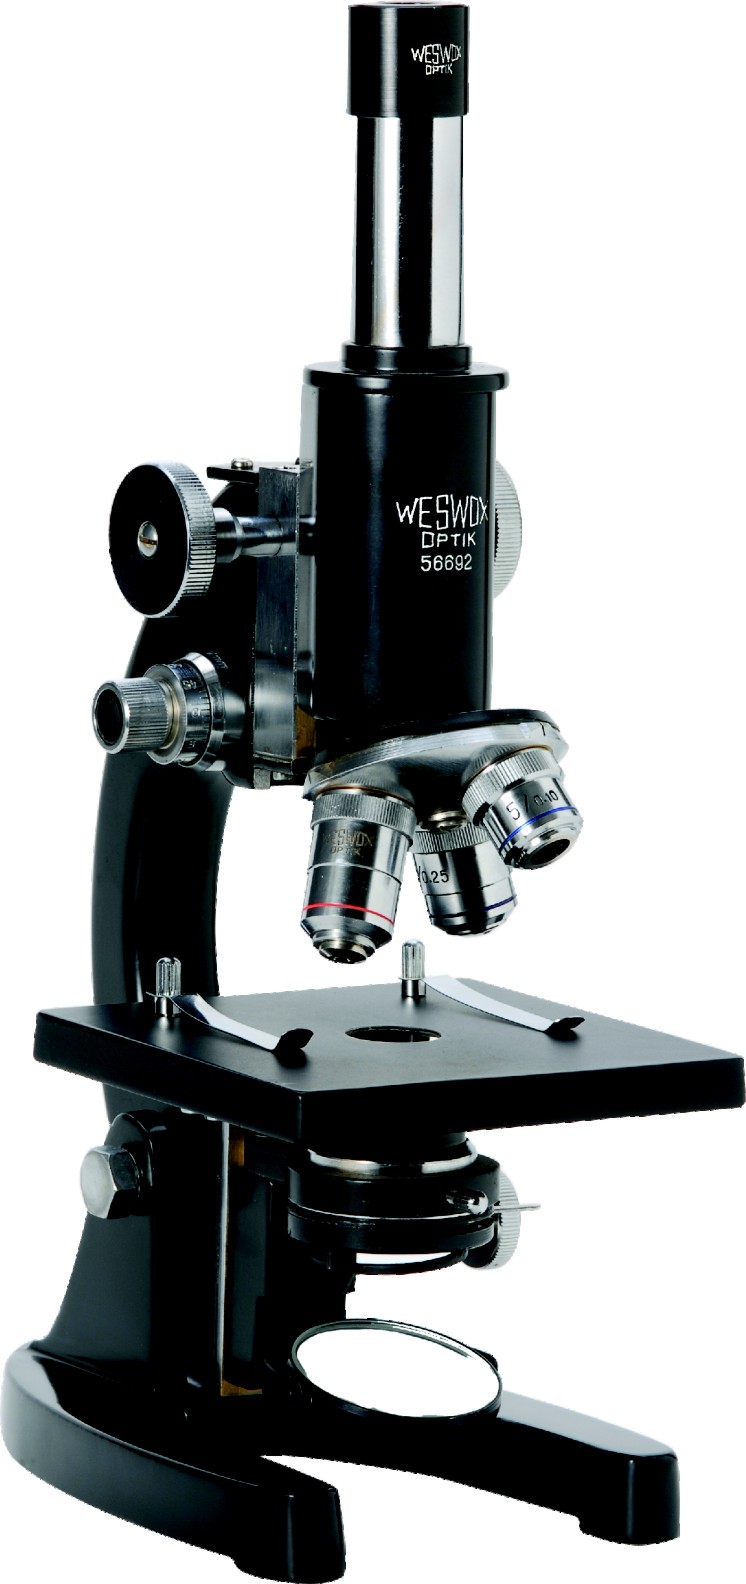 WESWOX Widefield Senior Student Microscope, Color : black